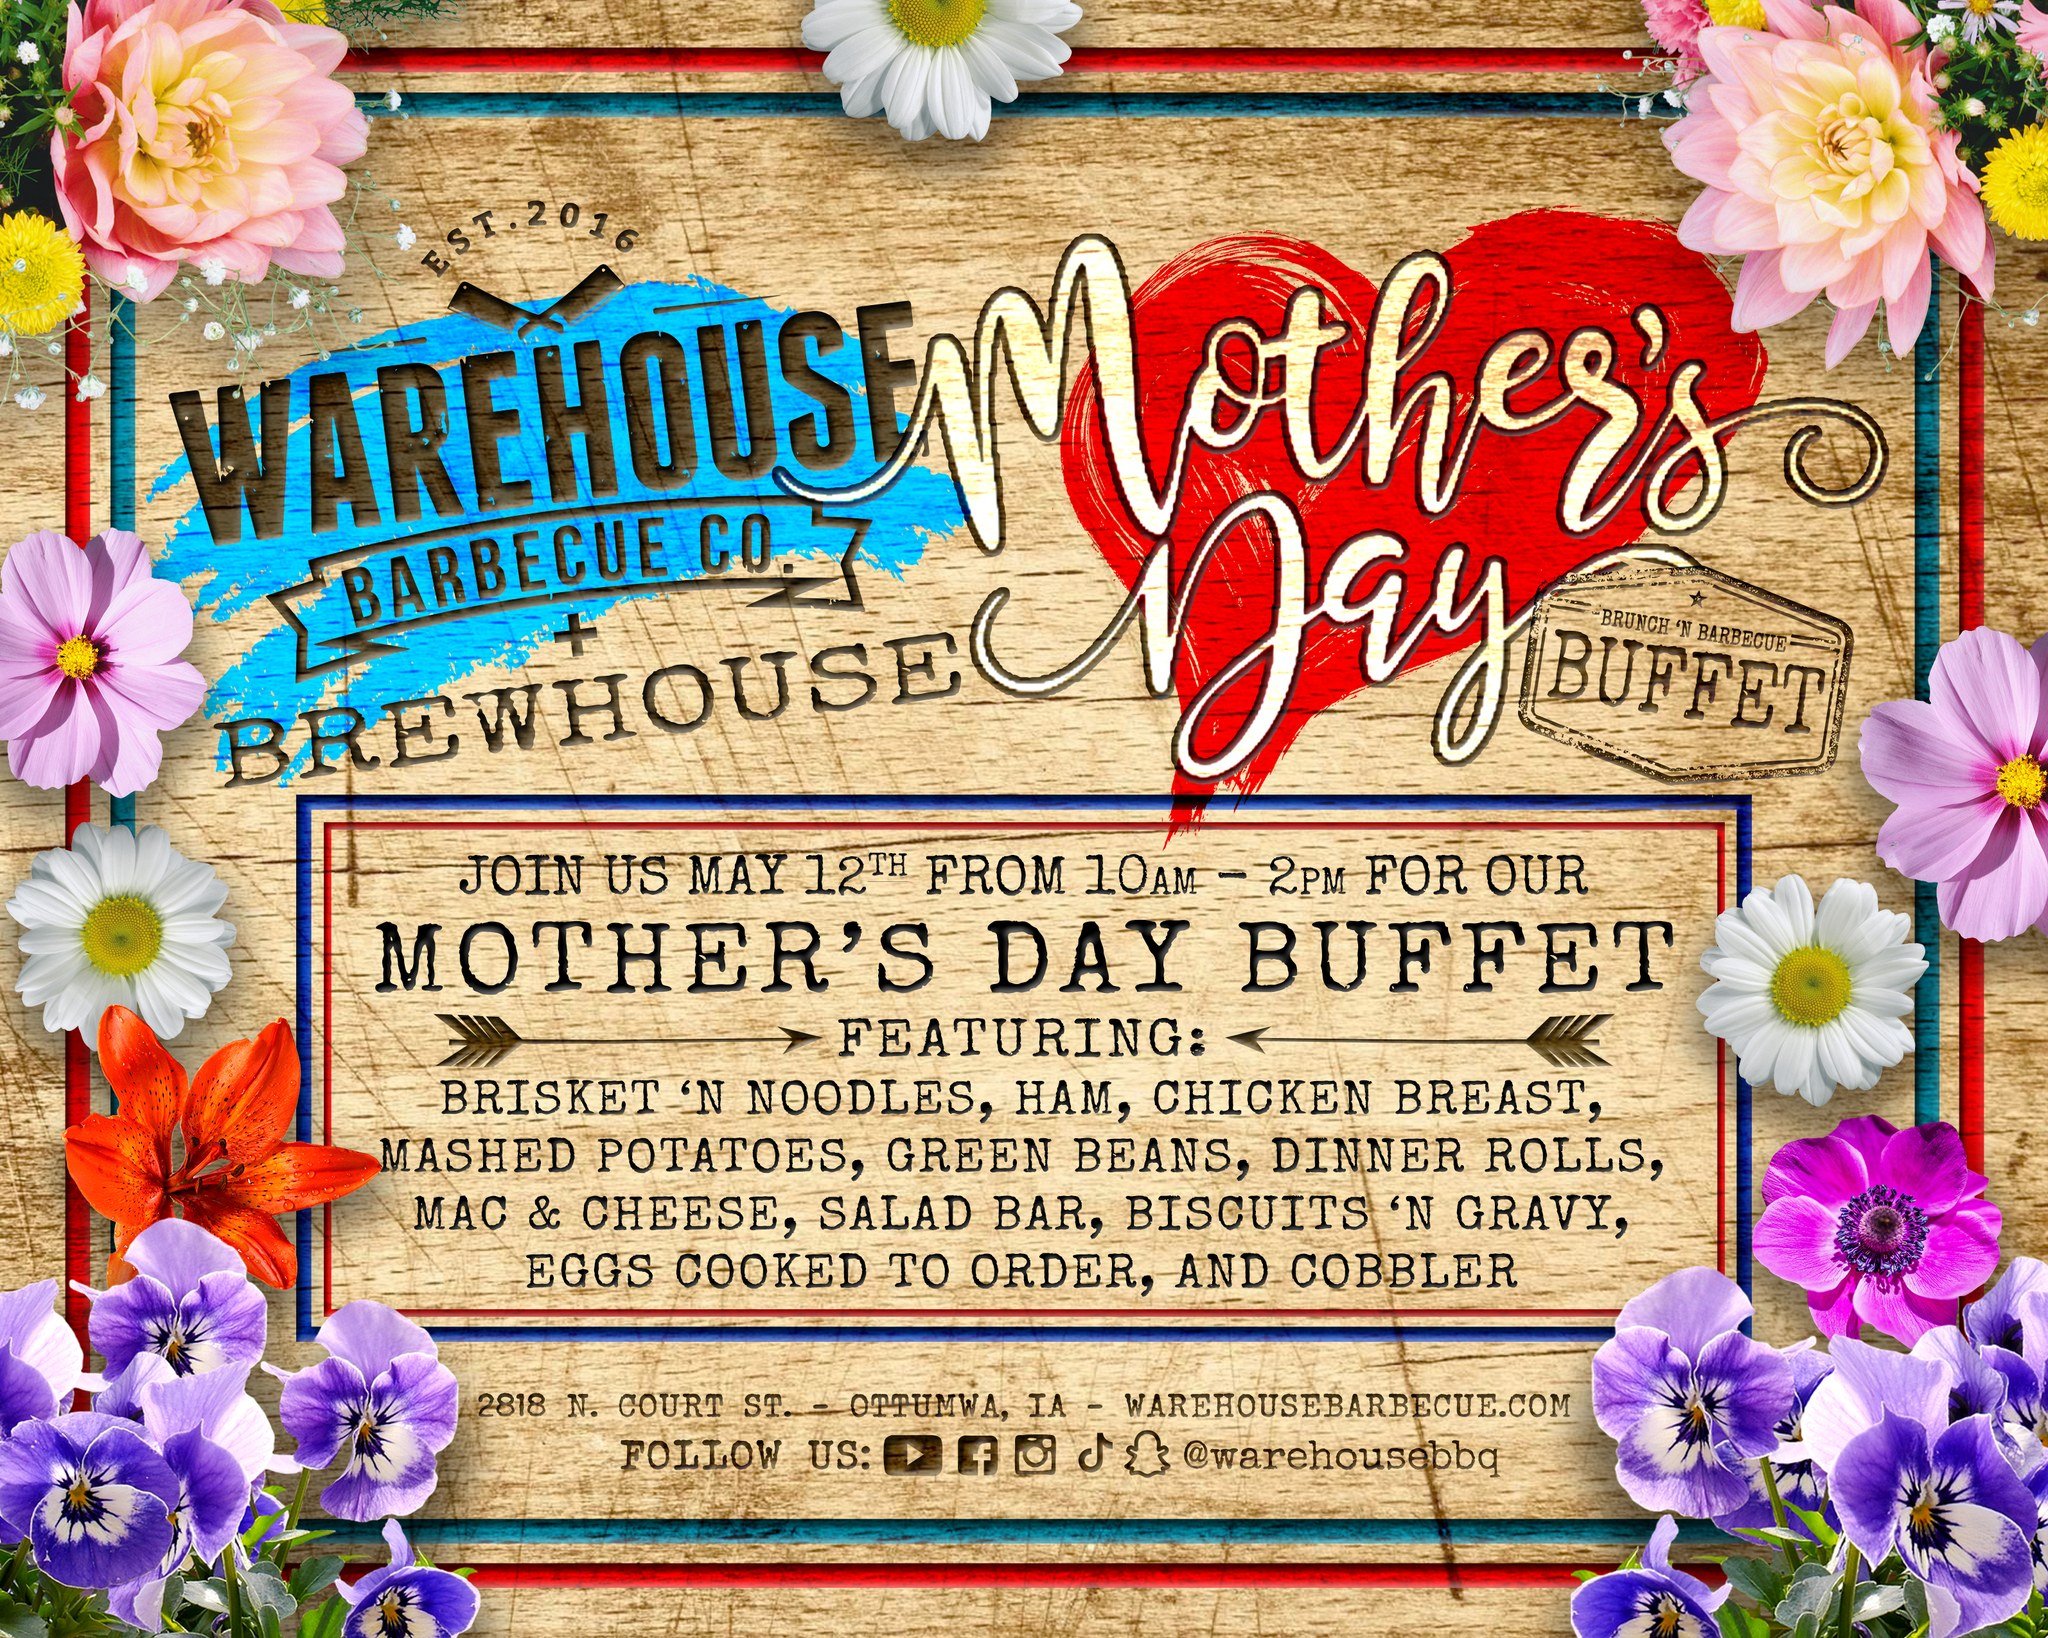 🎉SPECIAL MOTHER'S DAY BUFFET TODAY!🎉
10a.m-2p.m.

Today's the day we roll out the red carpet and we say THANK 'CUE to all the Supermoms, Wonder Women, and Queens of the family out there, if it weren't for you, life wouldn't have meaning and we woul